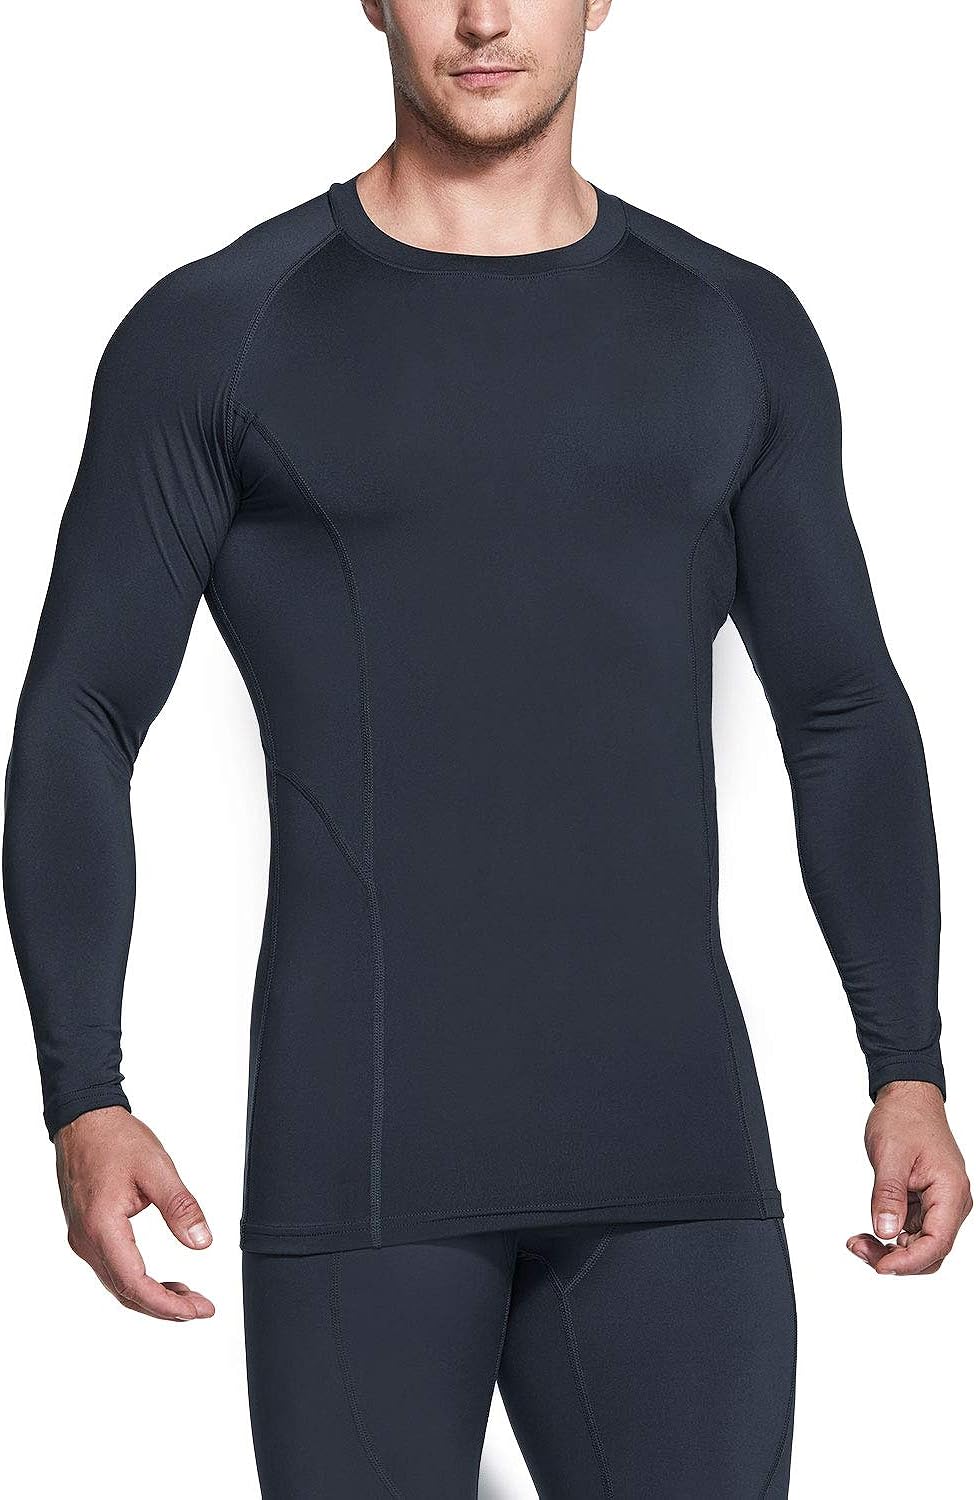 Winter Gear Running T-Shirt TSLA 1 or 2 Pack Men's Thermal Long Sleeve Compression Shirts Athletic Base Layer Top